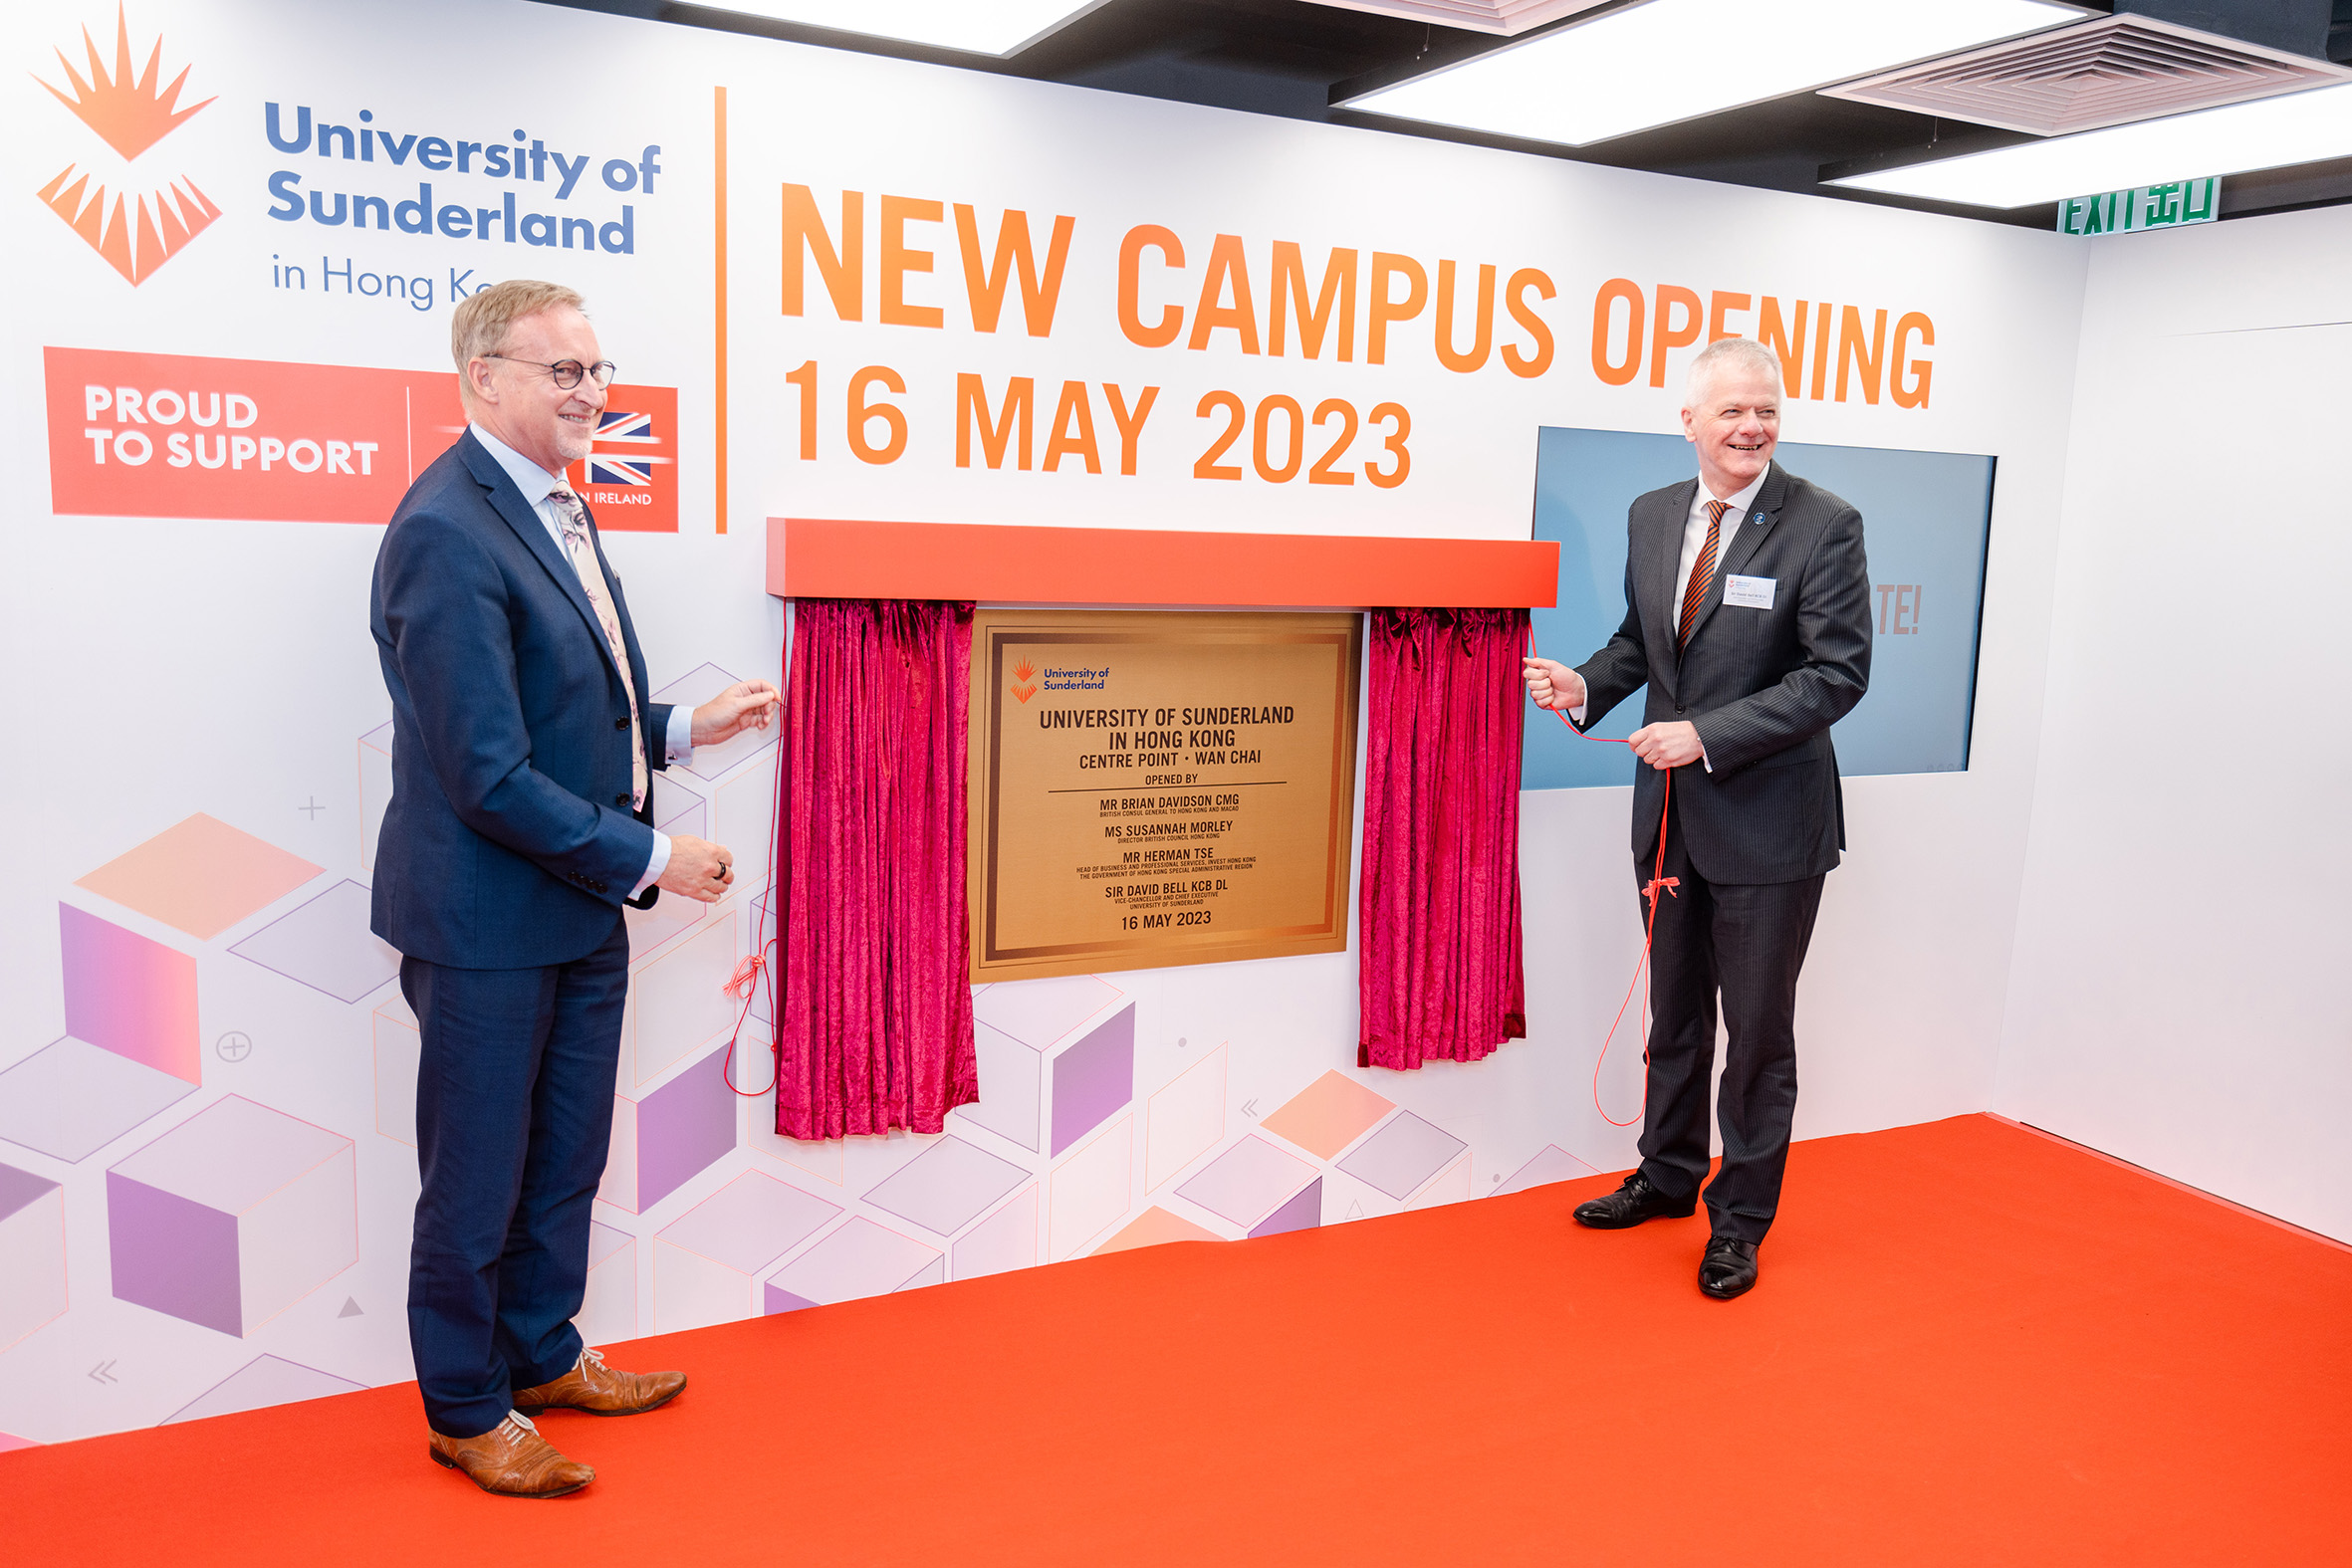 Mr Brian Davidson CMG, British Consul General to Hong Kong & Macao (left) and Sir David Bell KCB DL, Vice-Chancellor and Chief Executive of the University of Sunderland (right) unveiled the plaque for the new campus of University of Sunderland in Hong Kong.